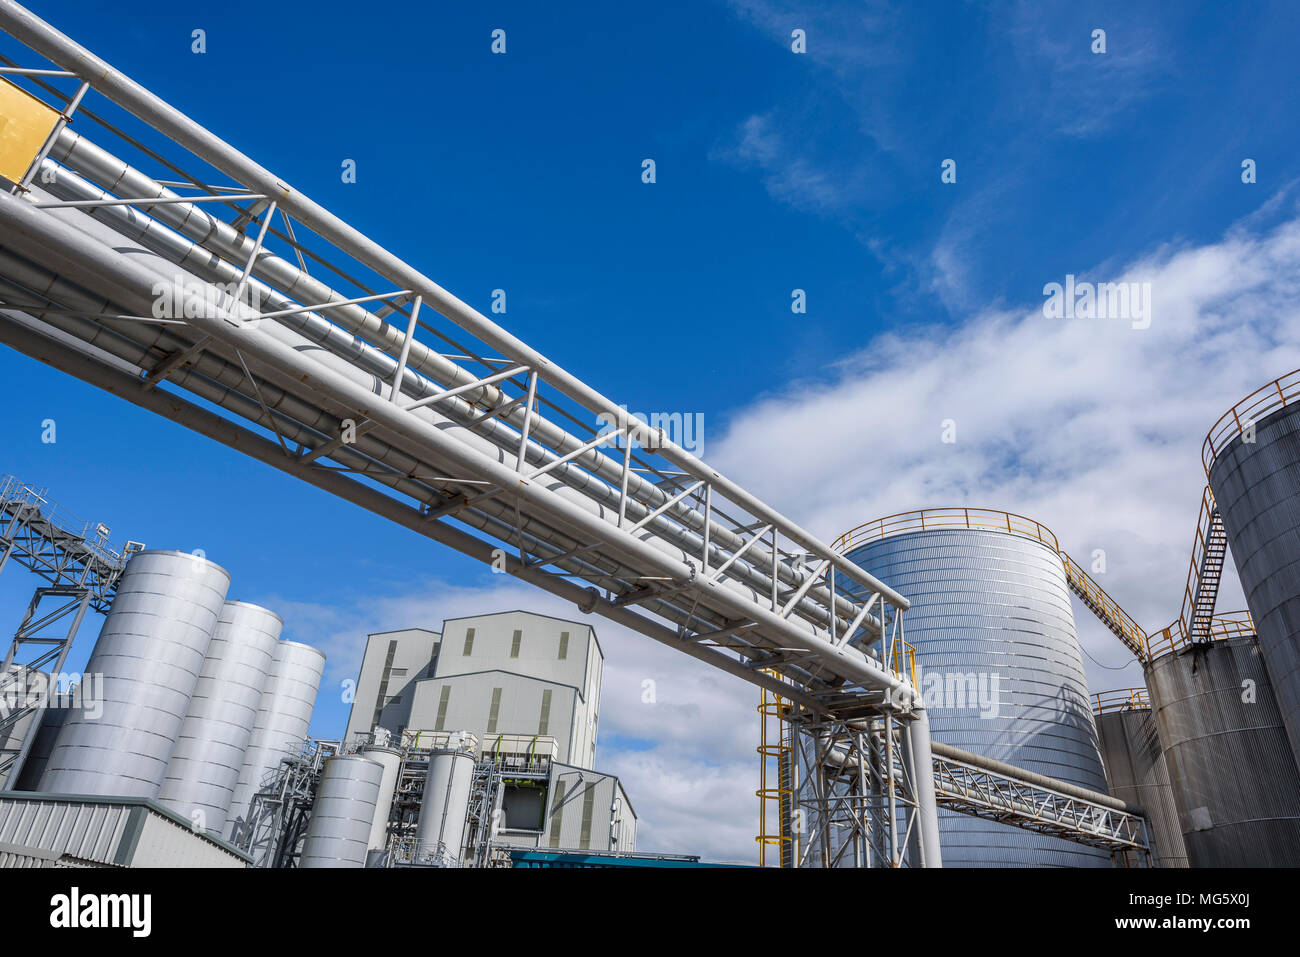 Large chemical processing plant structures. Stock Photo